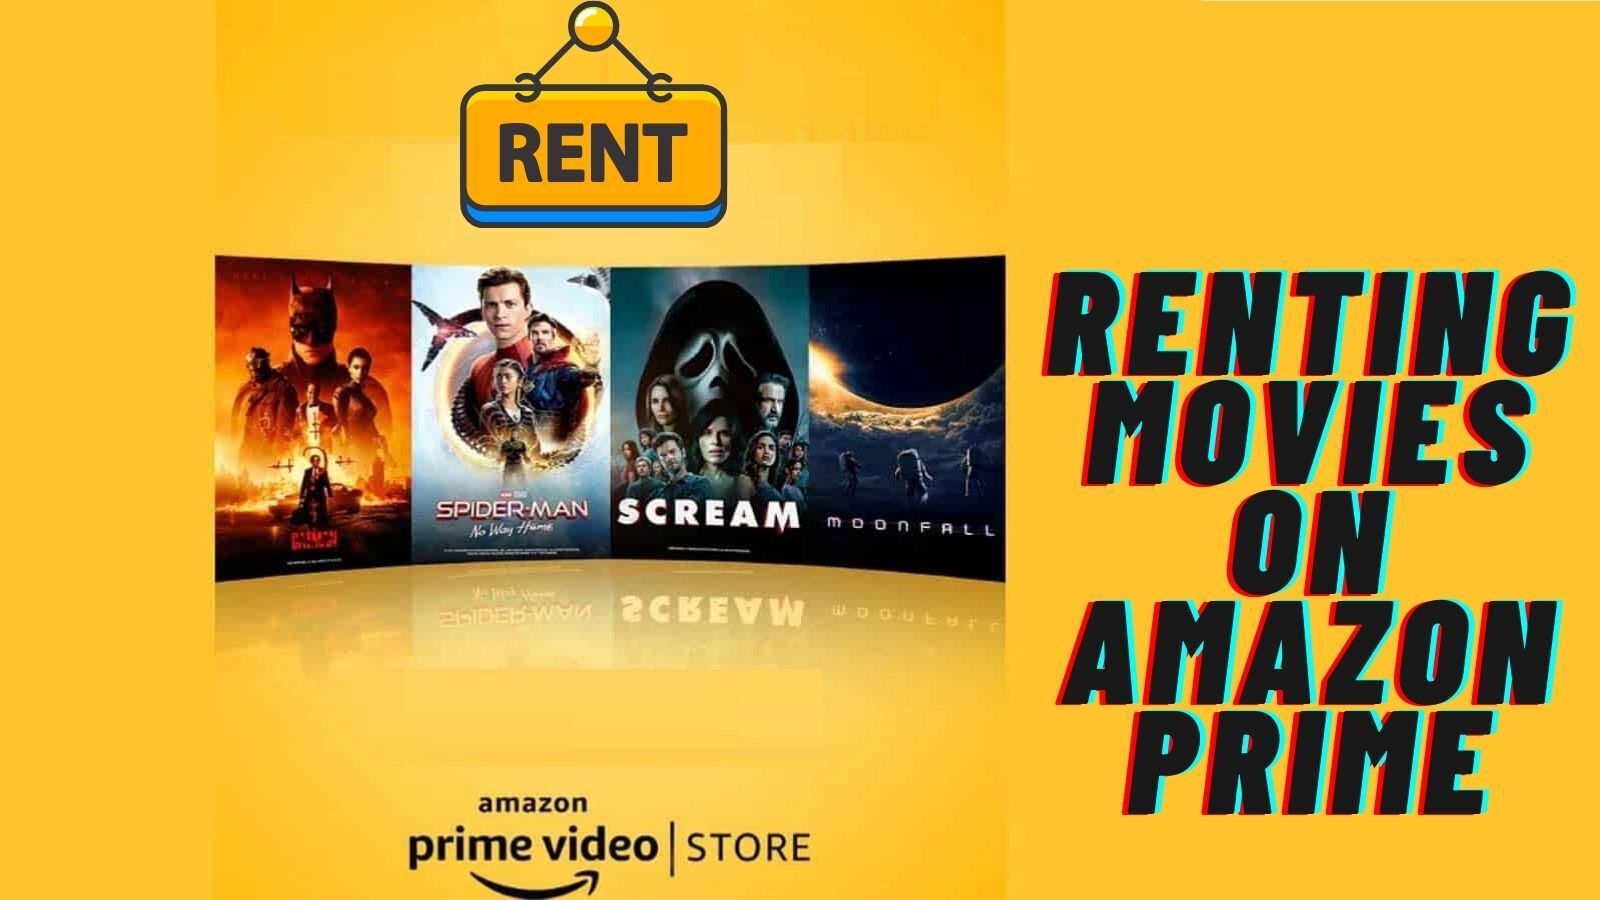 A Complete Guide of Renting Movies on Amazon Prime in 2022